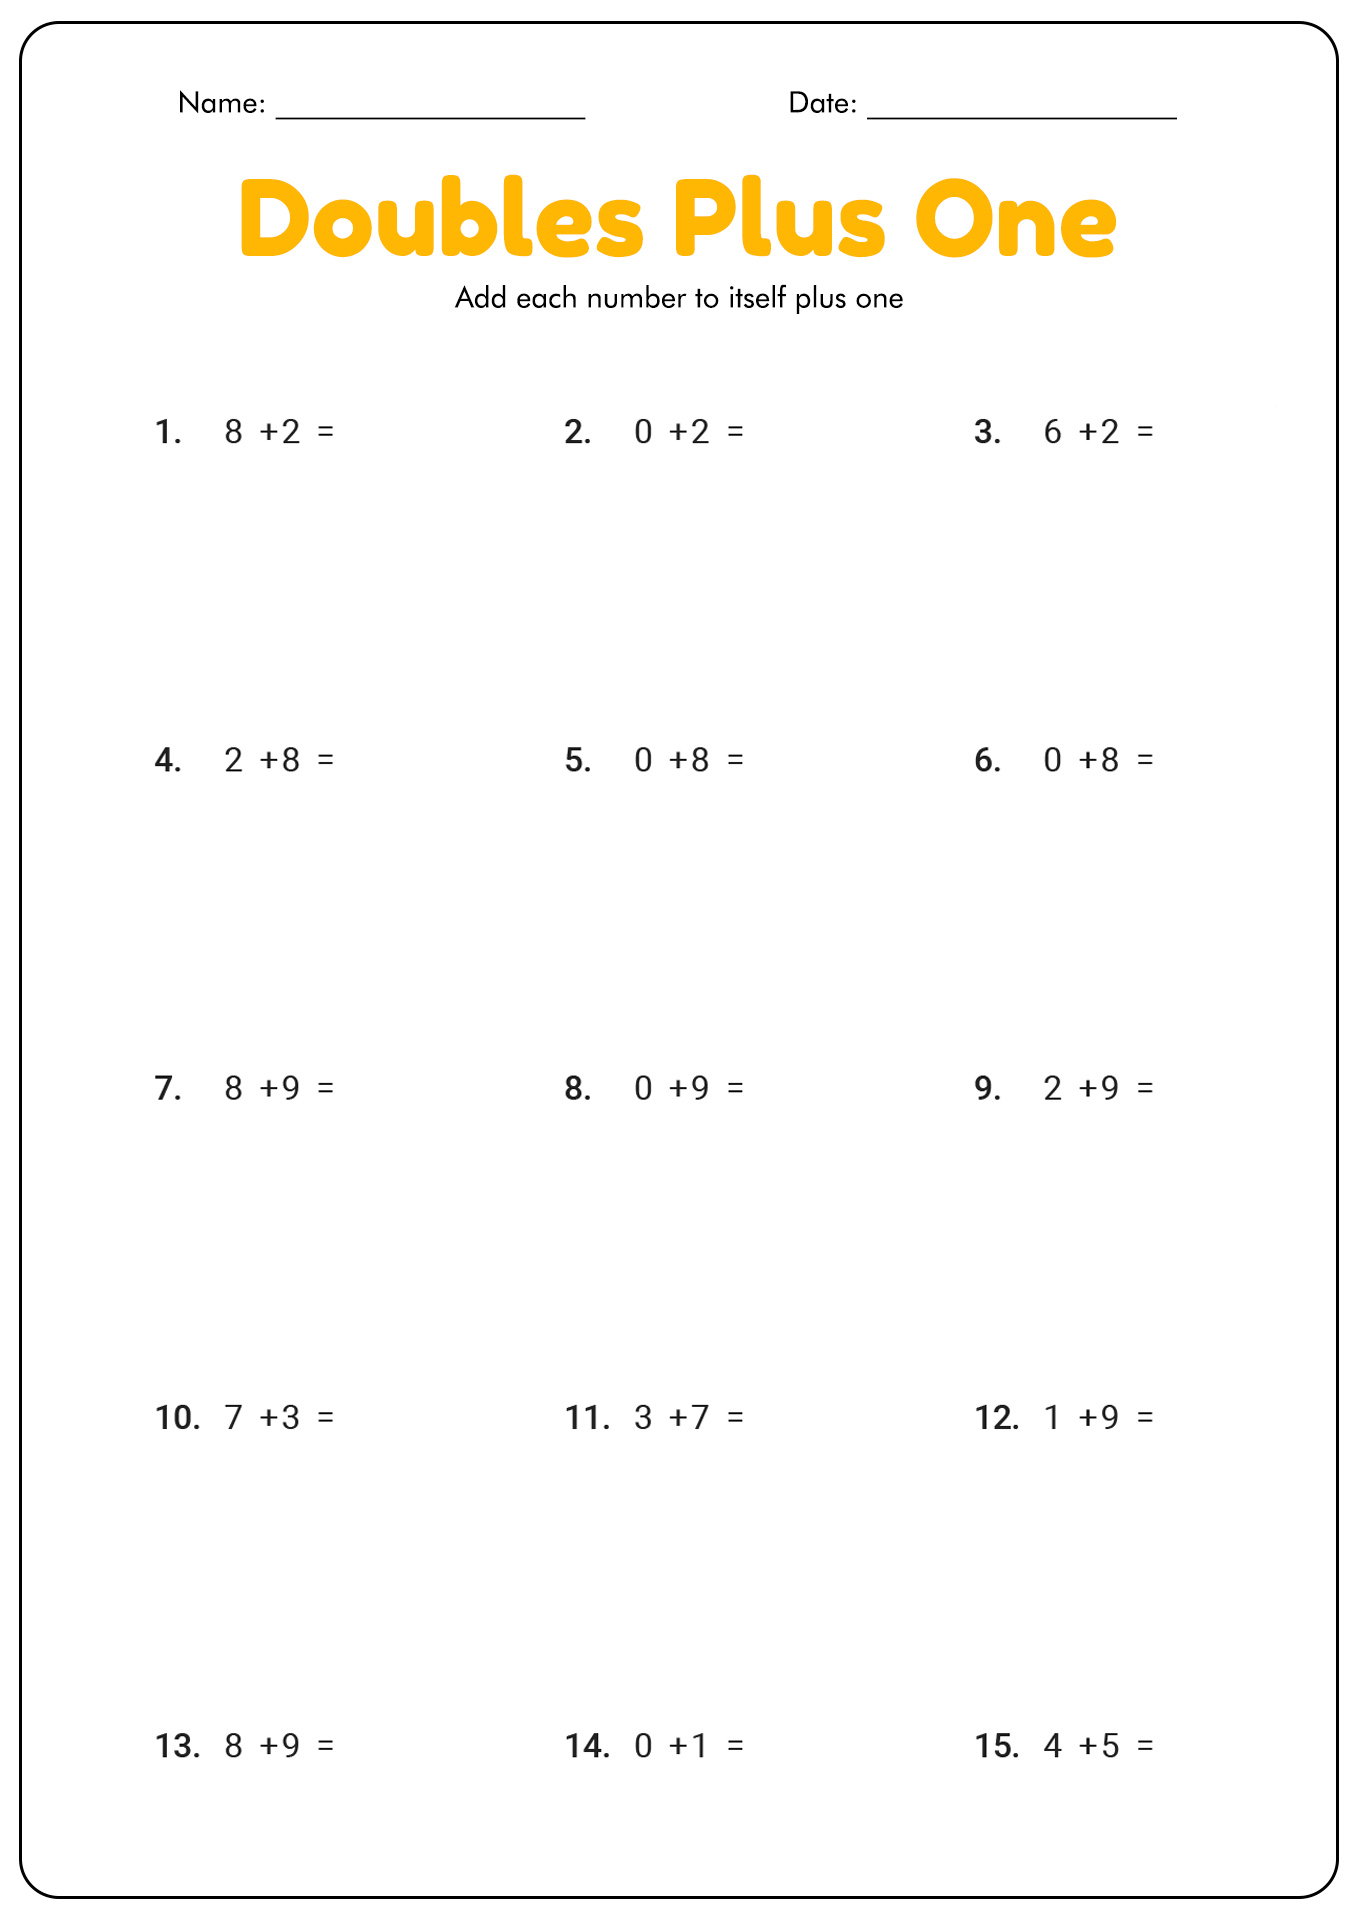 19 Best Images of Doubles Fact Practice Worksheet Doubles Plus One